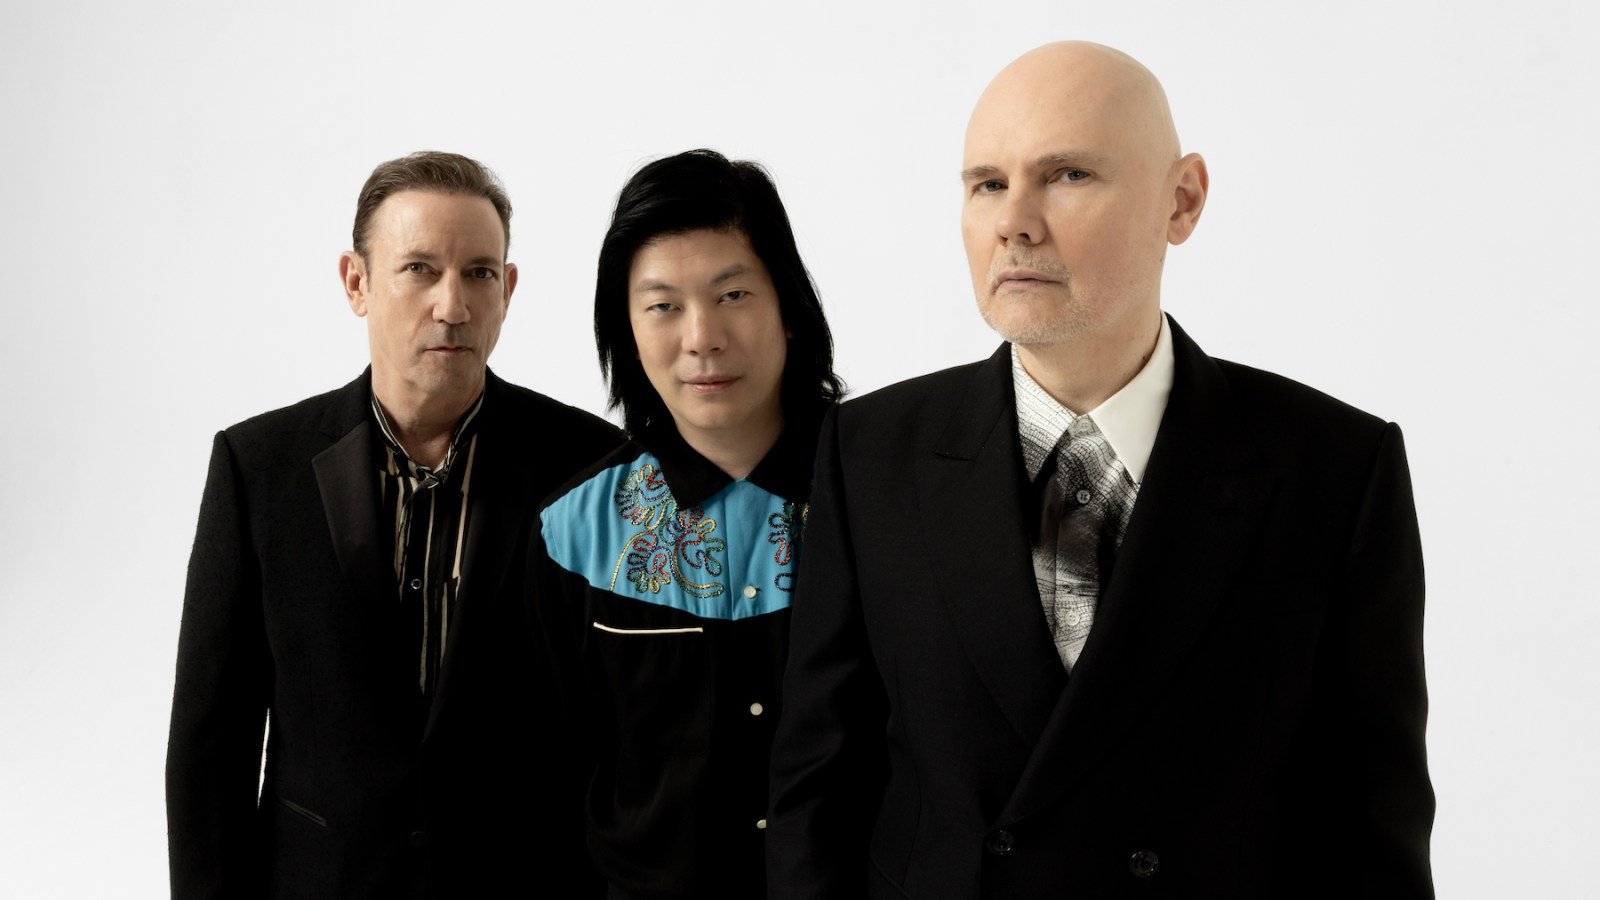 Billy Corgan Wants to Rock Out Again. Is That a Good Thing?